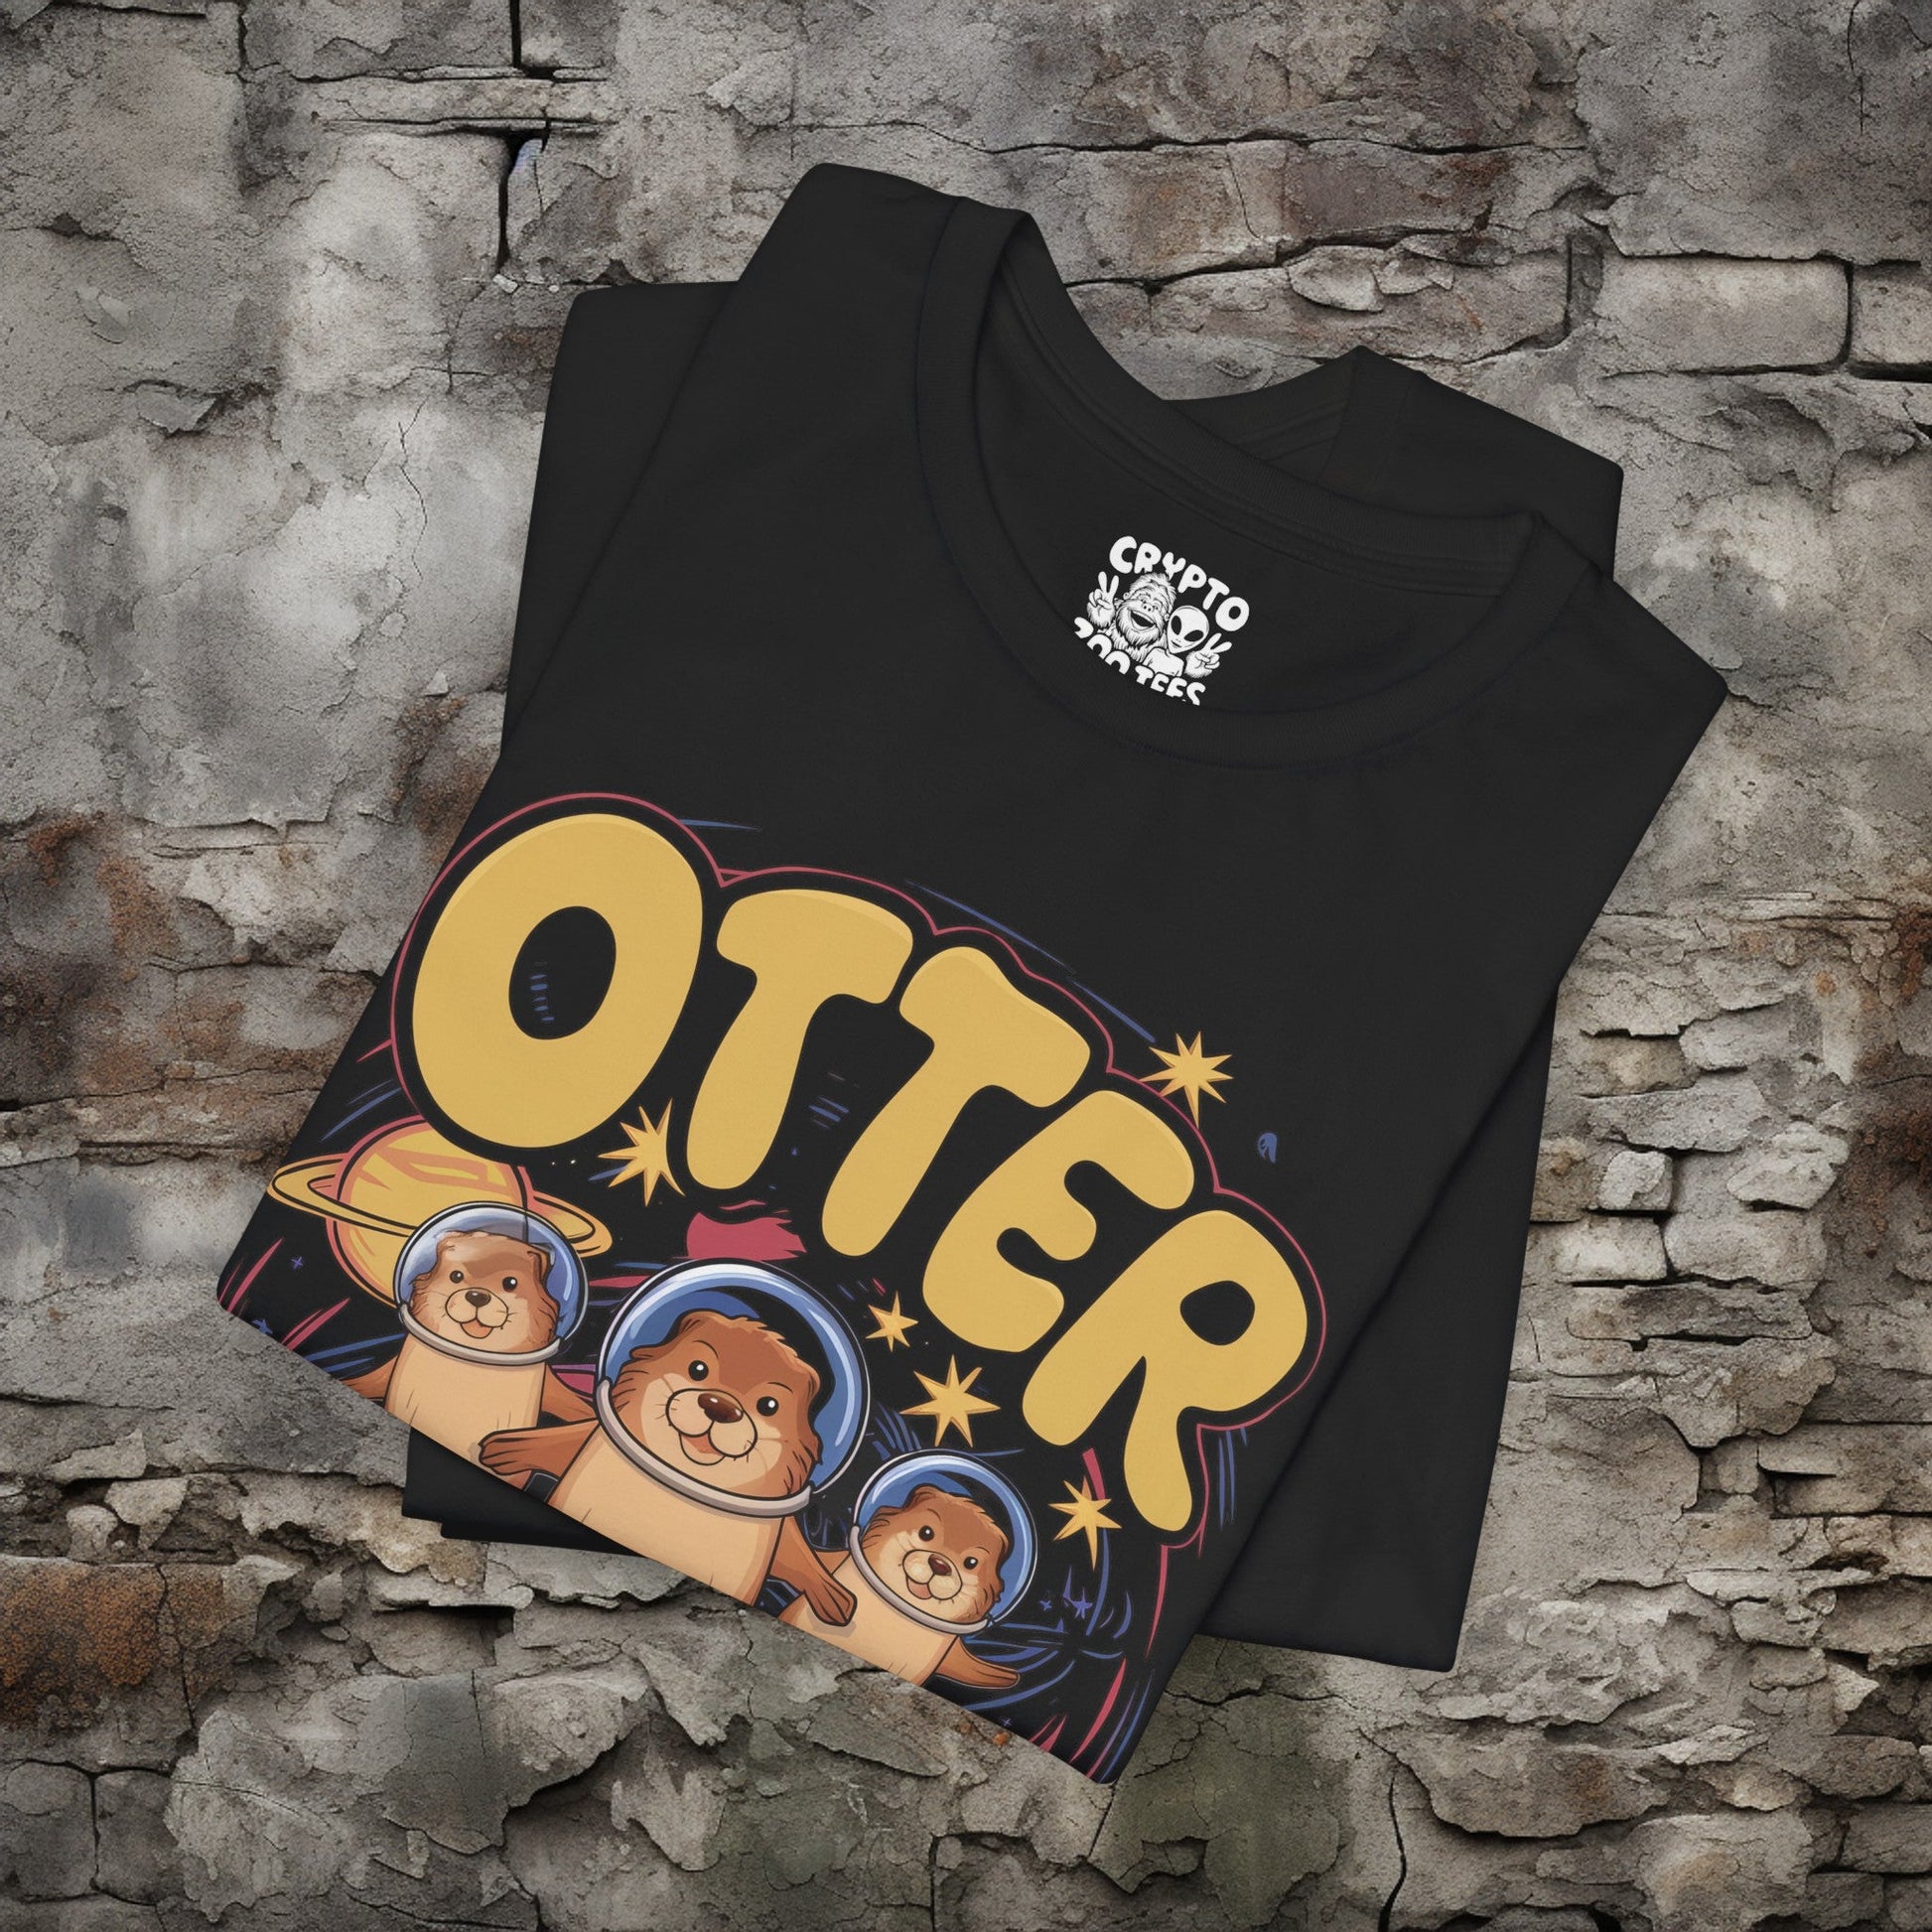 T-Shirt - Otter Space Cute Funny Astronaut Otter Tee | Bella + Canvas Unisex T-shirt from Crypto Zoo Tees